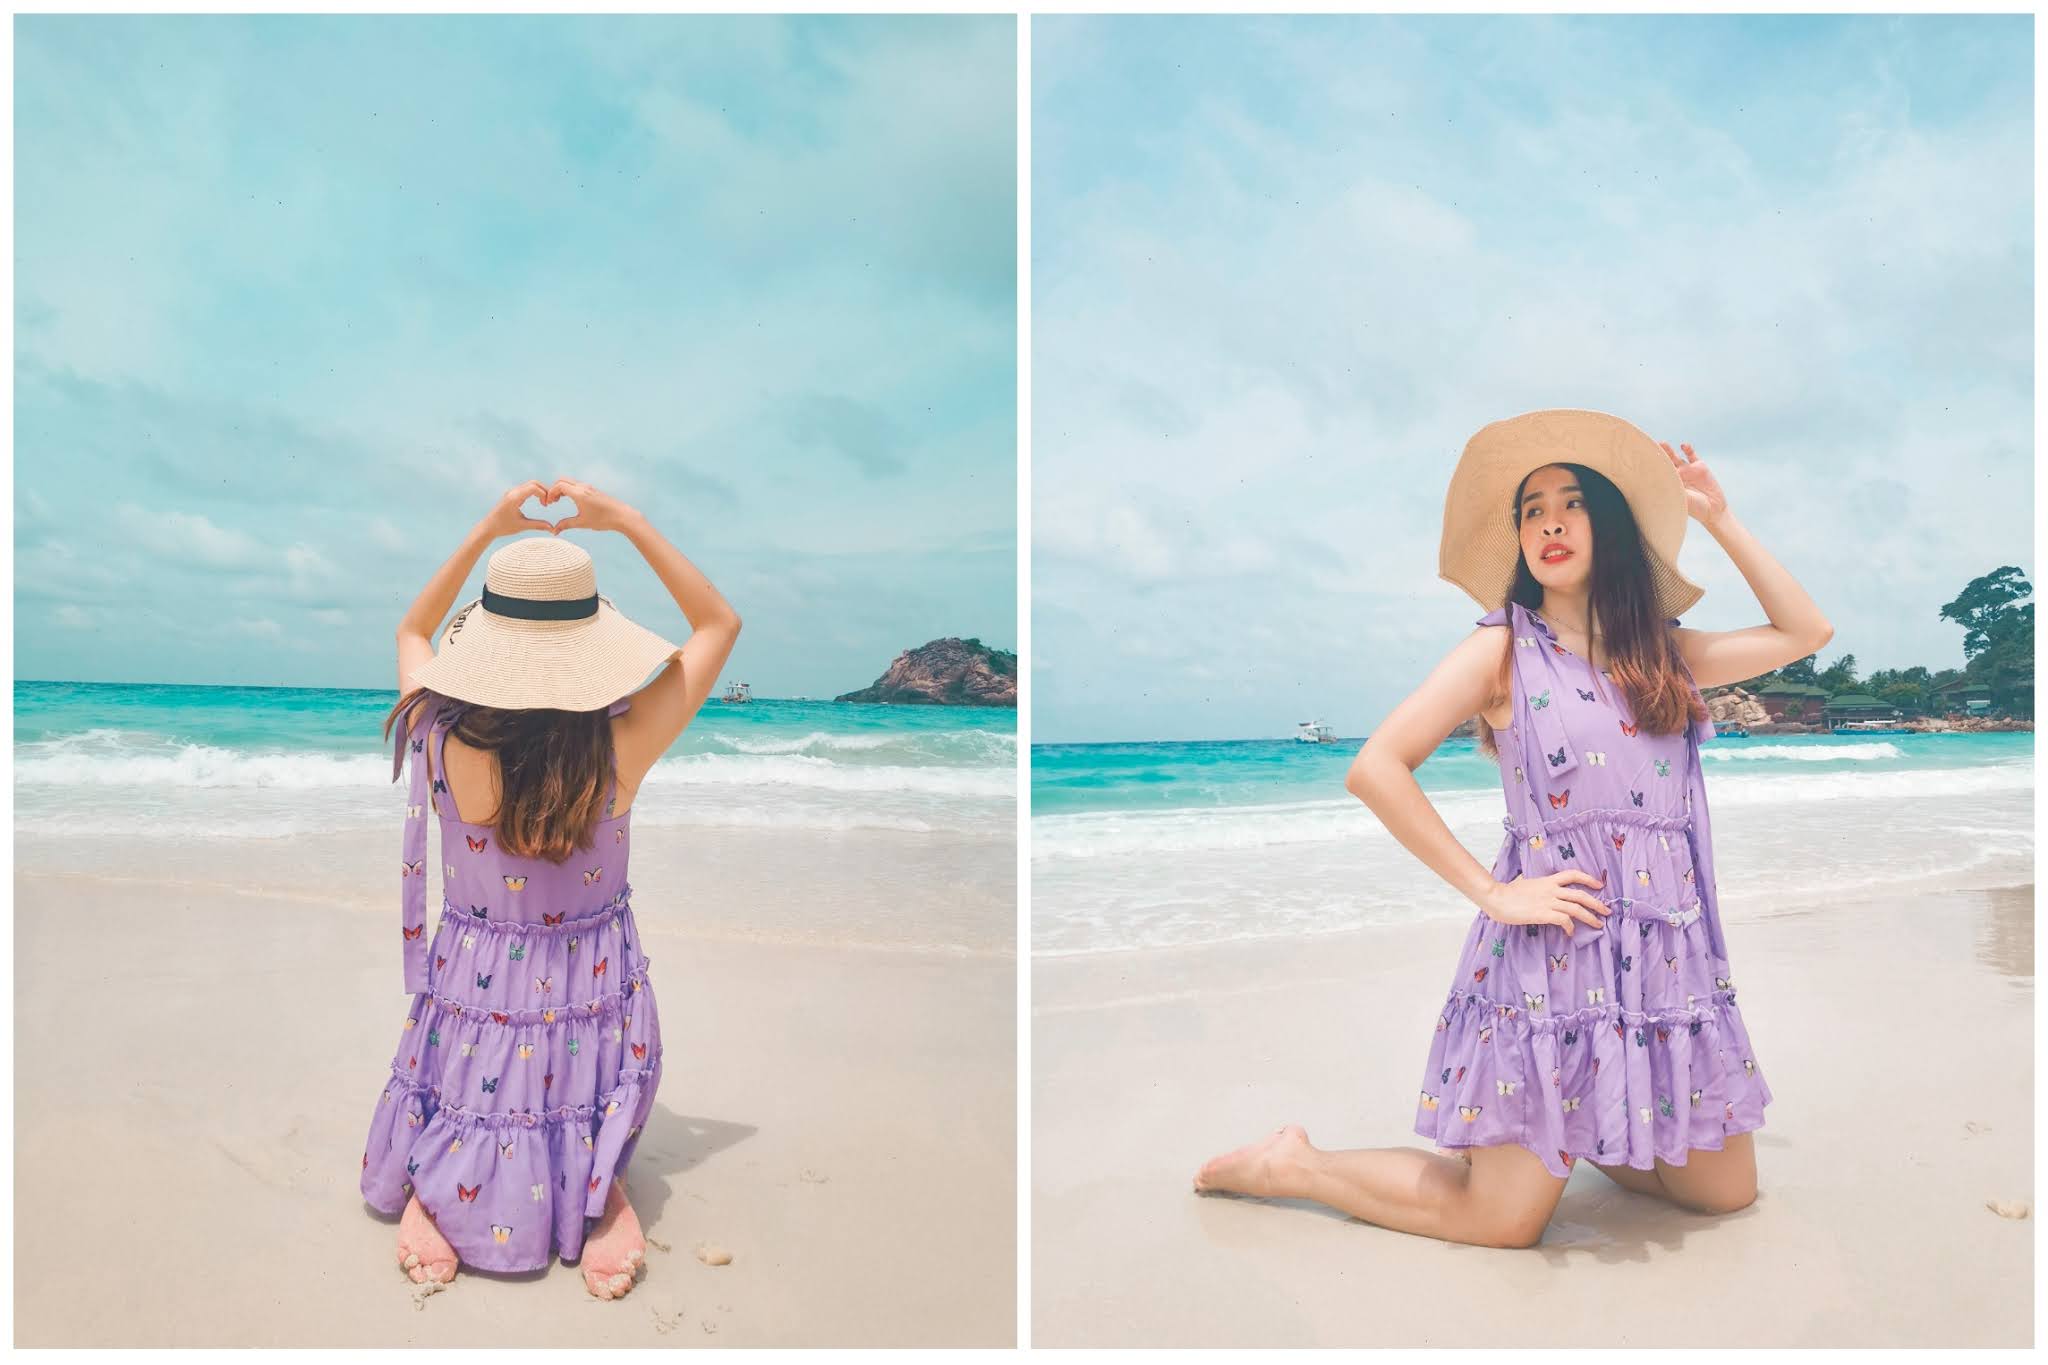 Top 15 Vacation Photoshoot Poses That Look Natural | Flytographer